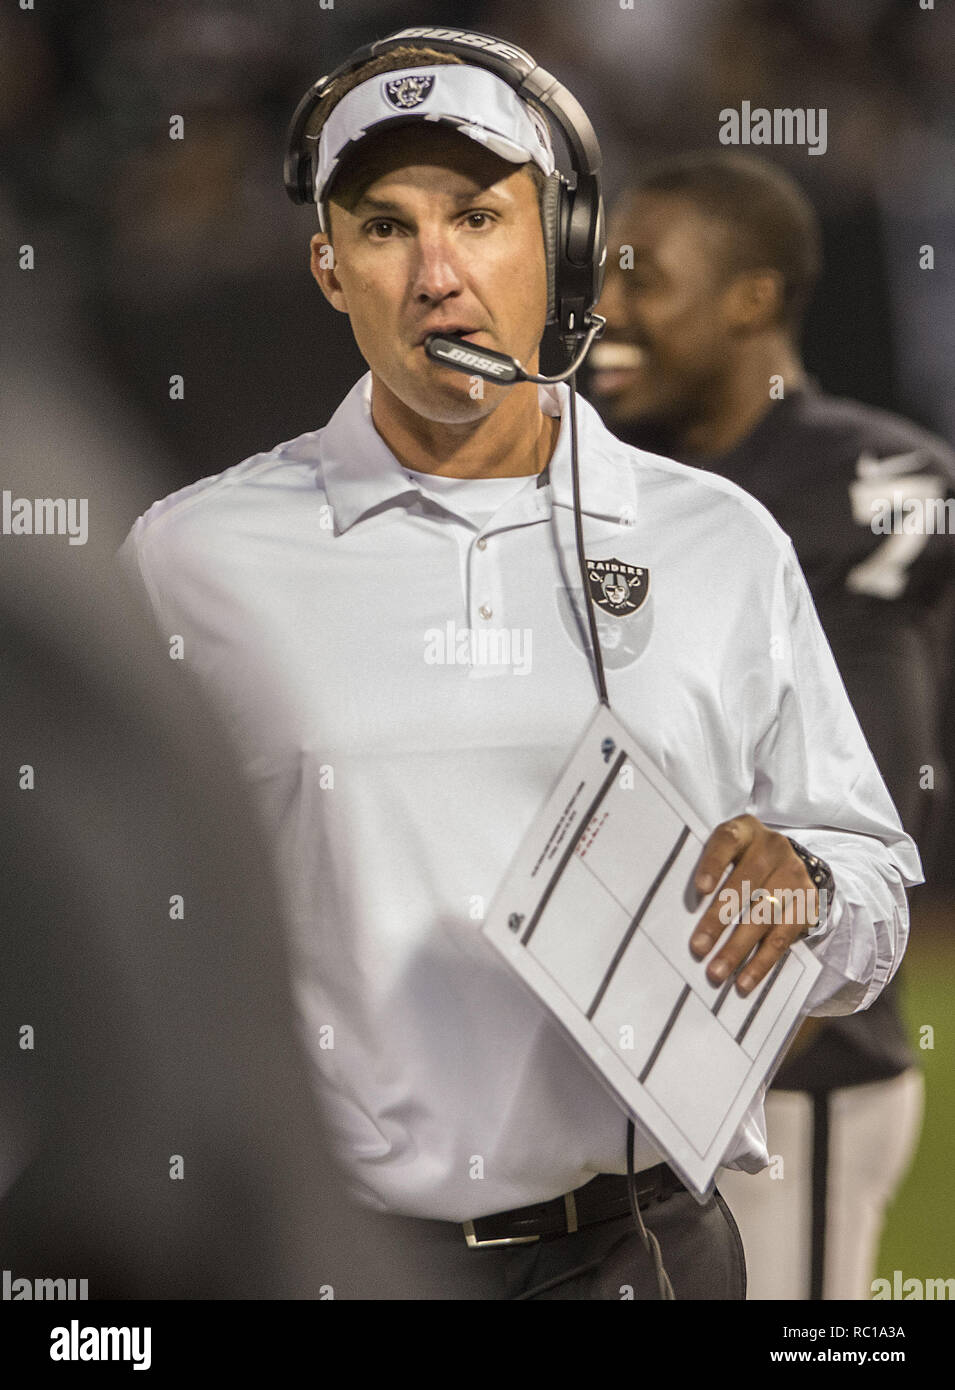 Oakland, California, USA. 15th Aug, 2014. August 15, 2014 Raiders head coach Dennis Allen on Friday, August 15, 2014, at O.co Coliseum in Oakland, California. The Raiders defeated the Lions 27-26 in a preseason game. Credit: Al Golub/ZUMA Wire/Alamy Live News Stock Photo